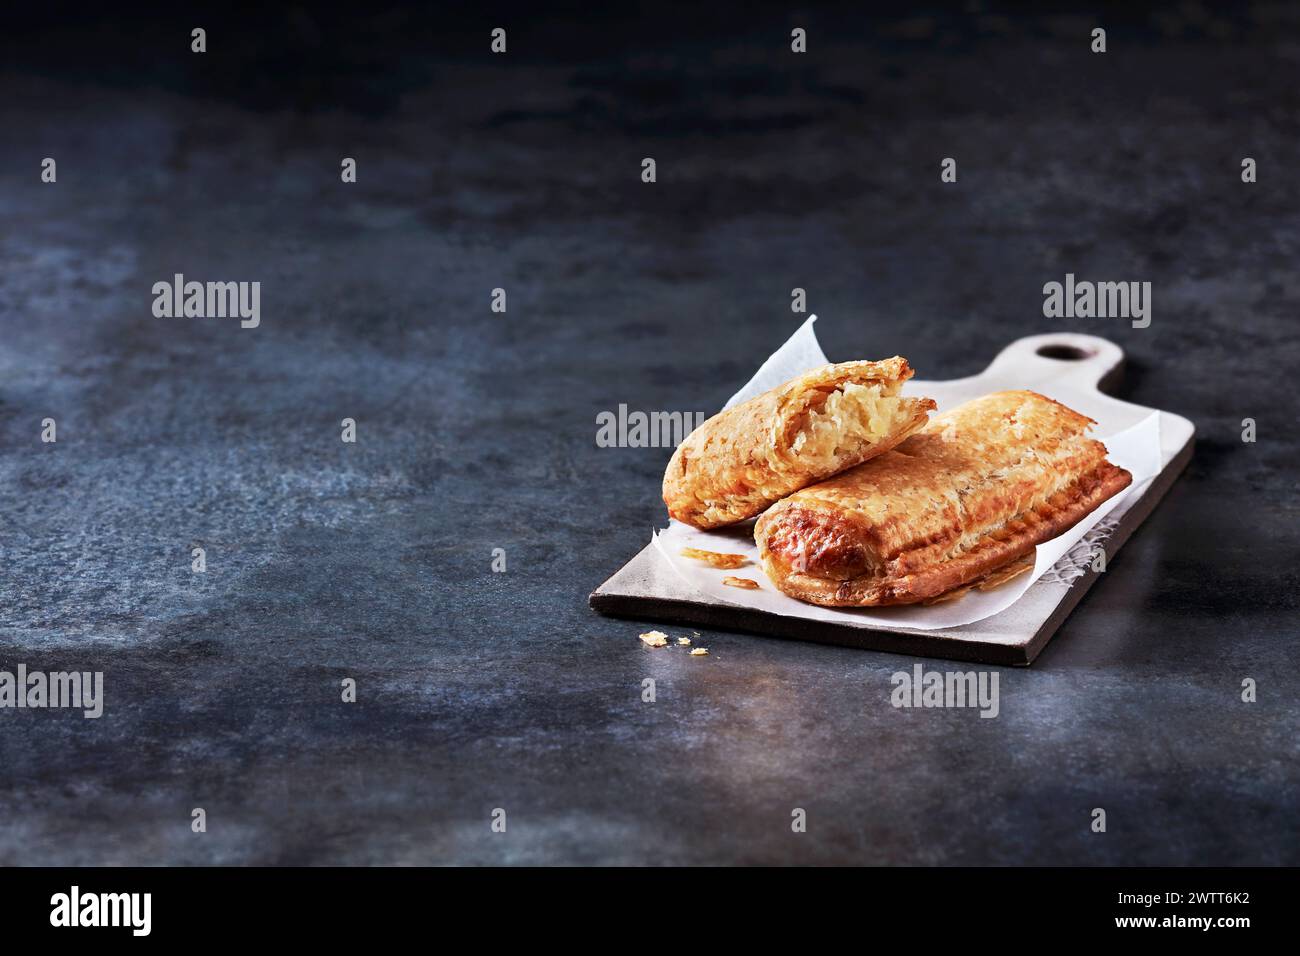 Freshly baked pastries on a dark, textured countertop Stock Photo